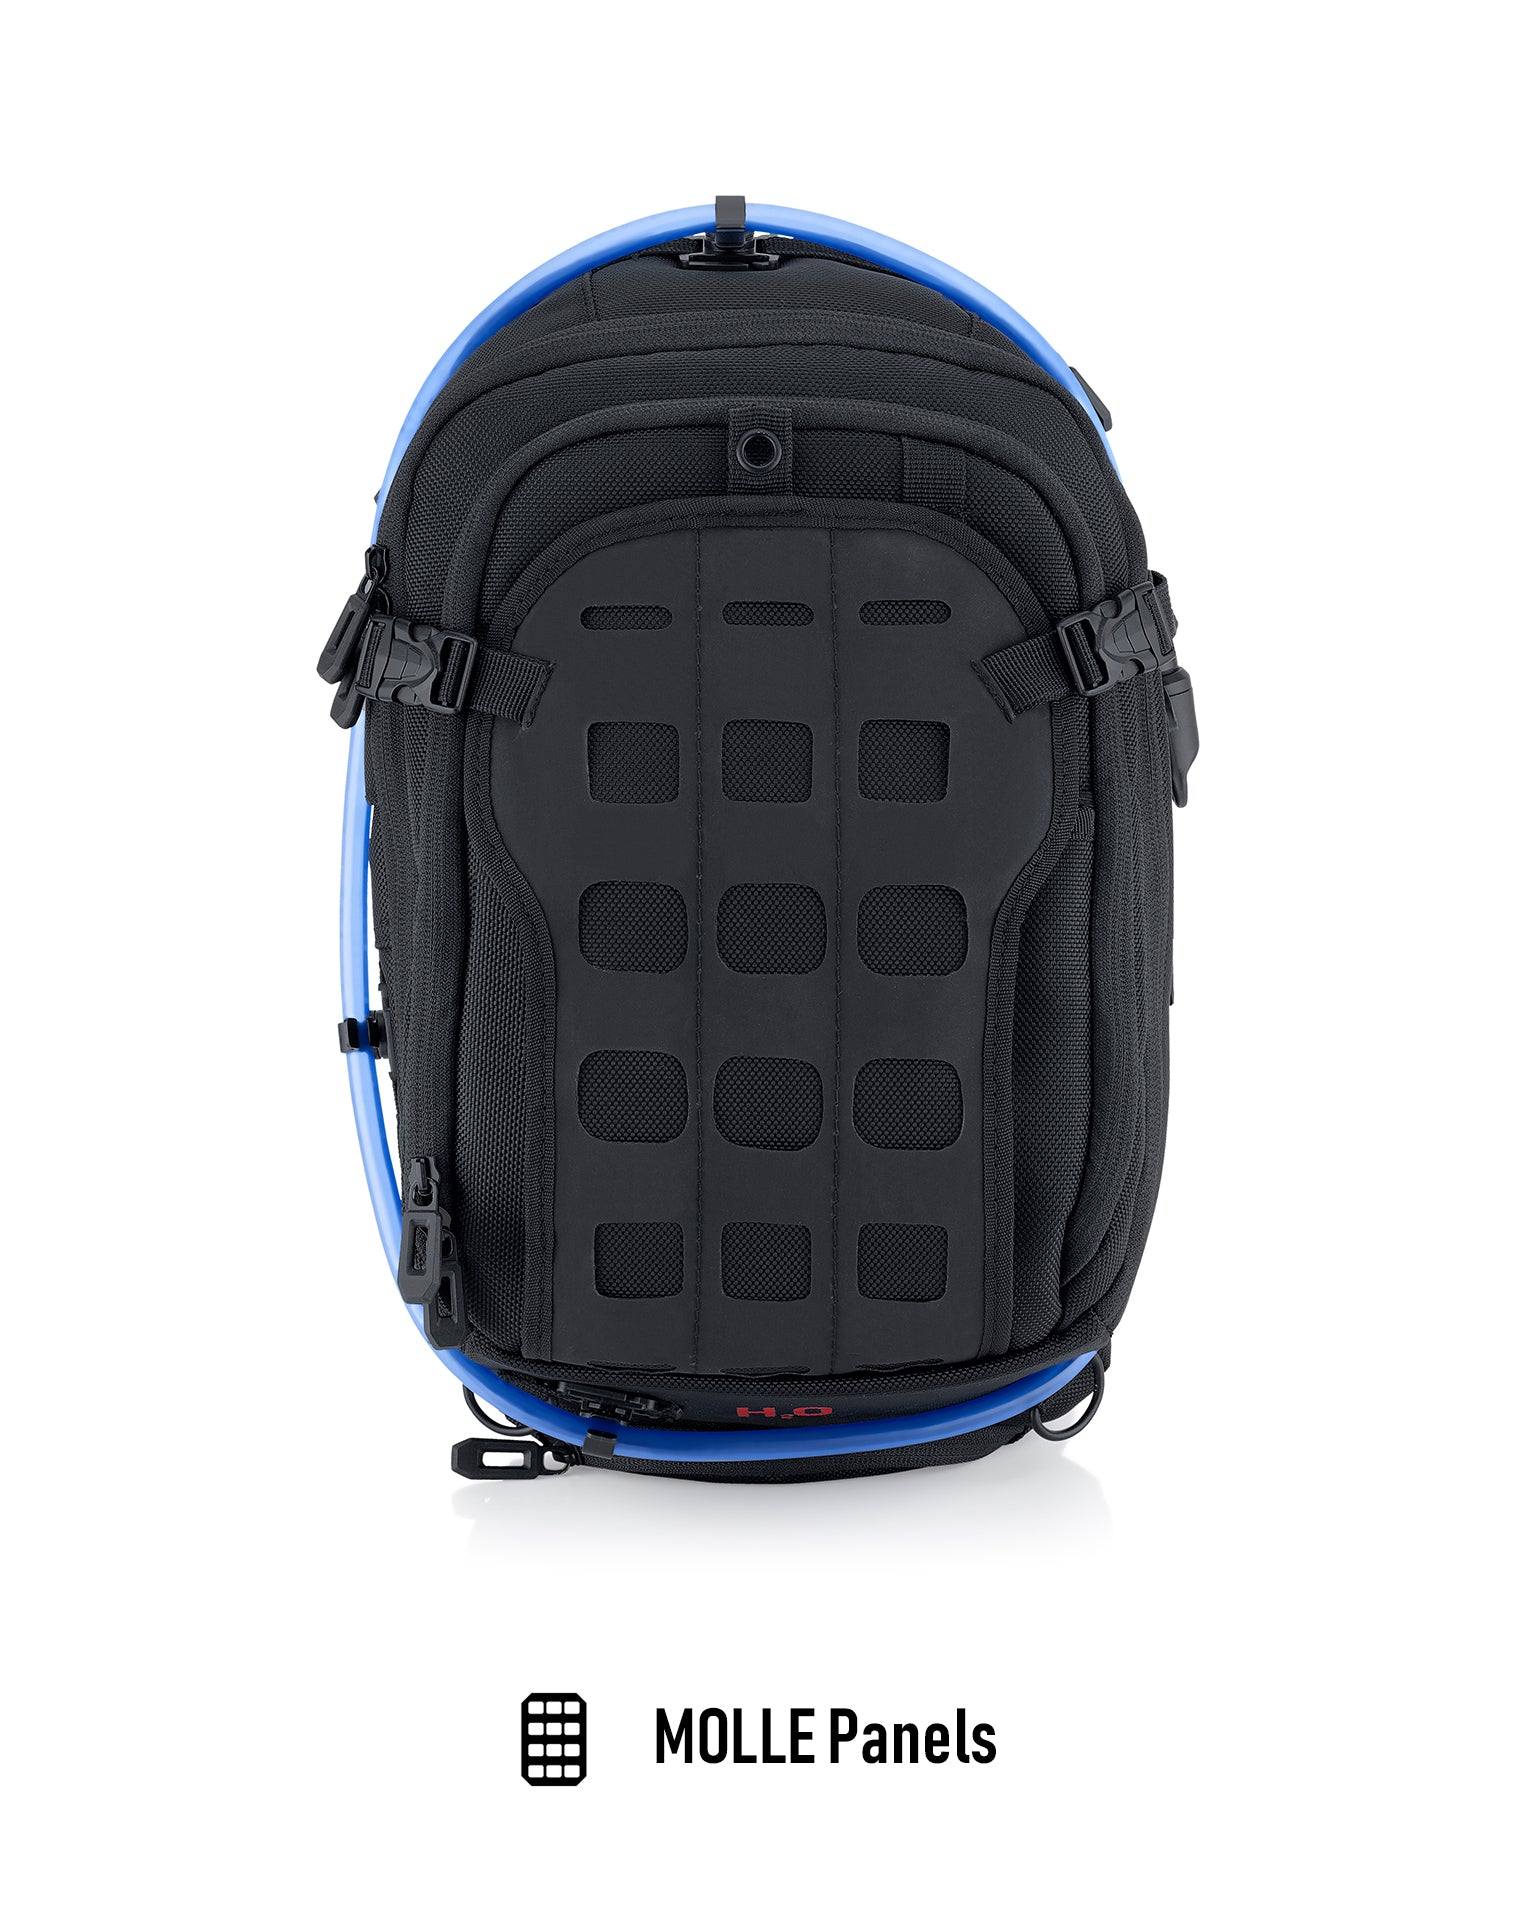 Viking Apex Ducati ADV Touring Backpack with Hydration Pack